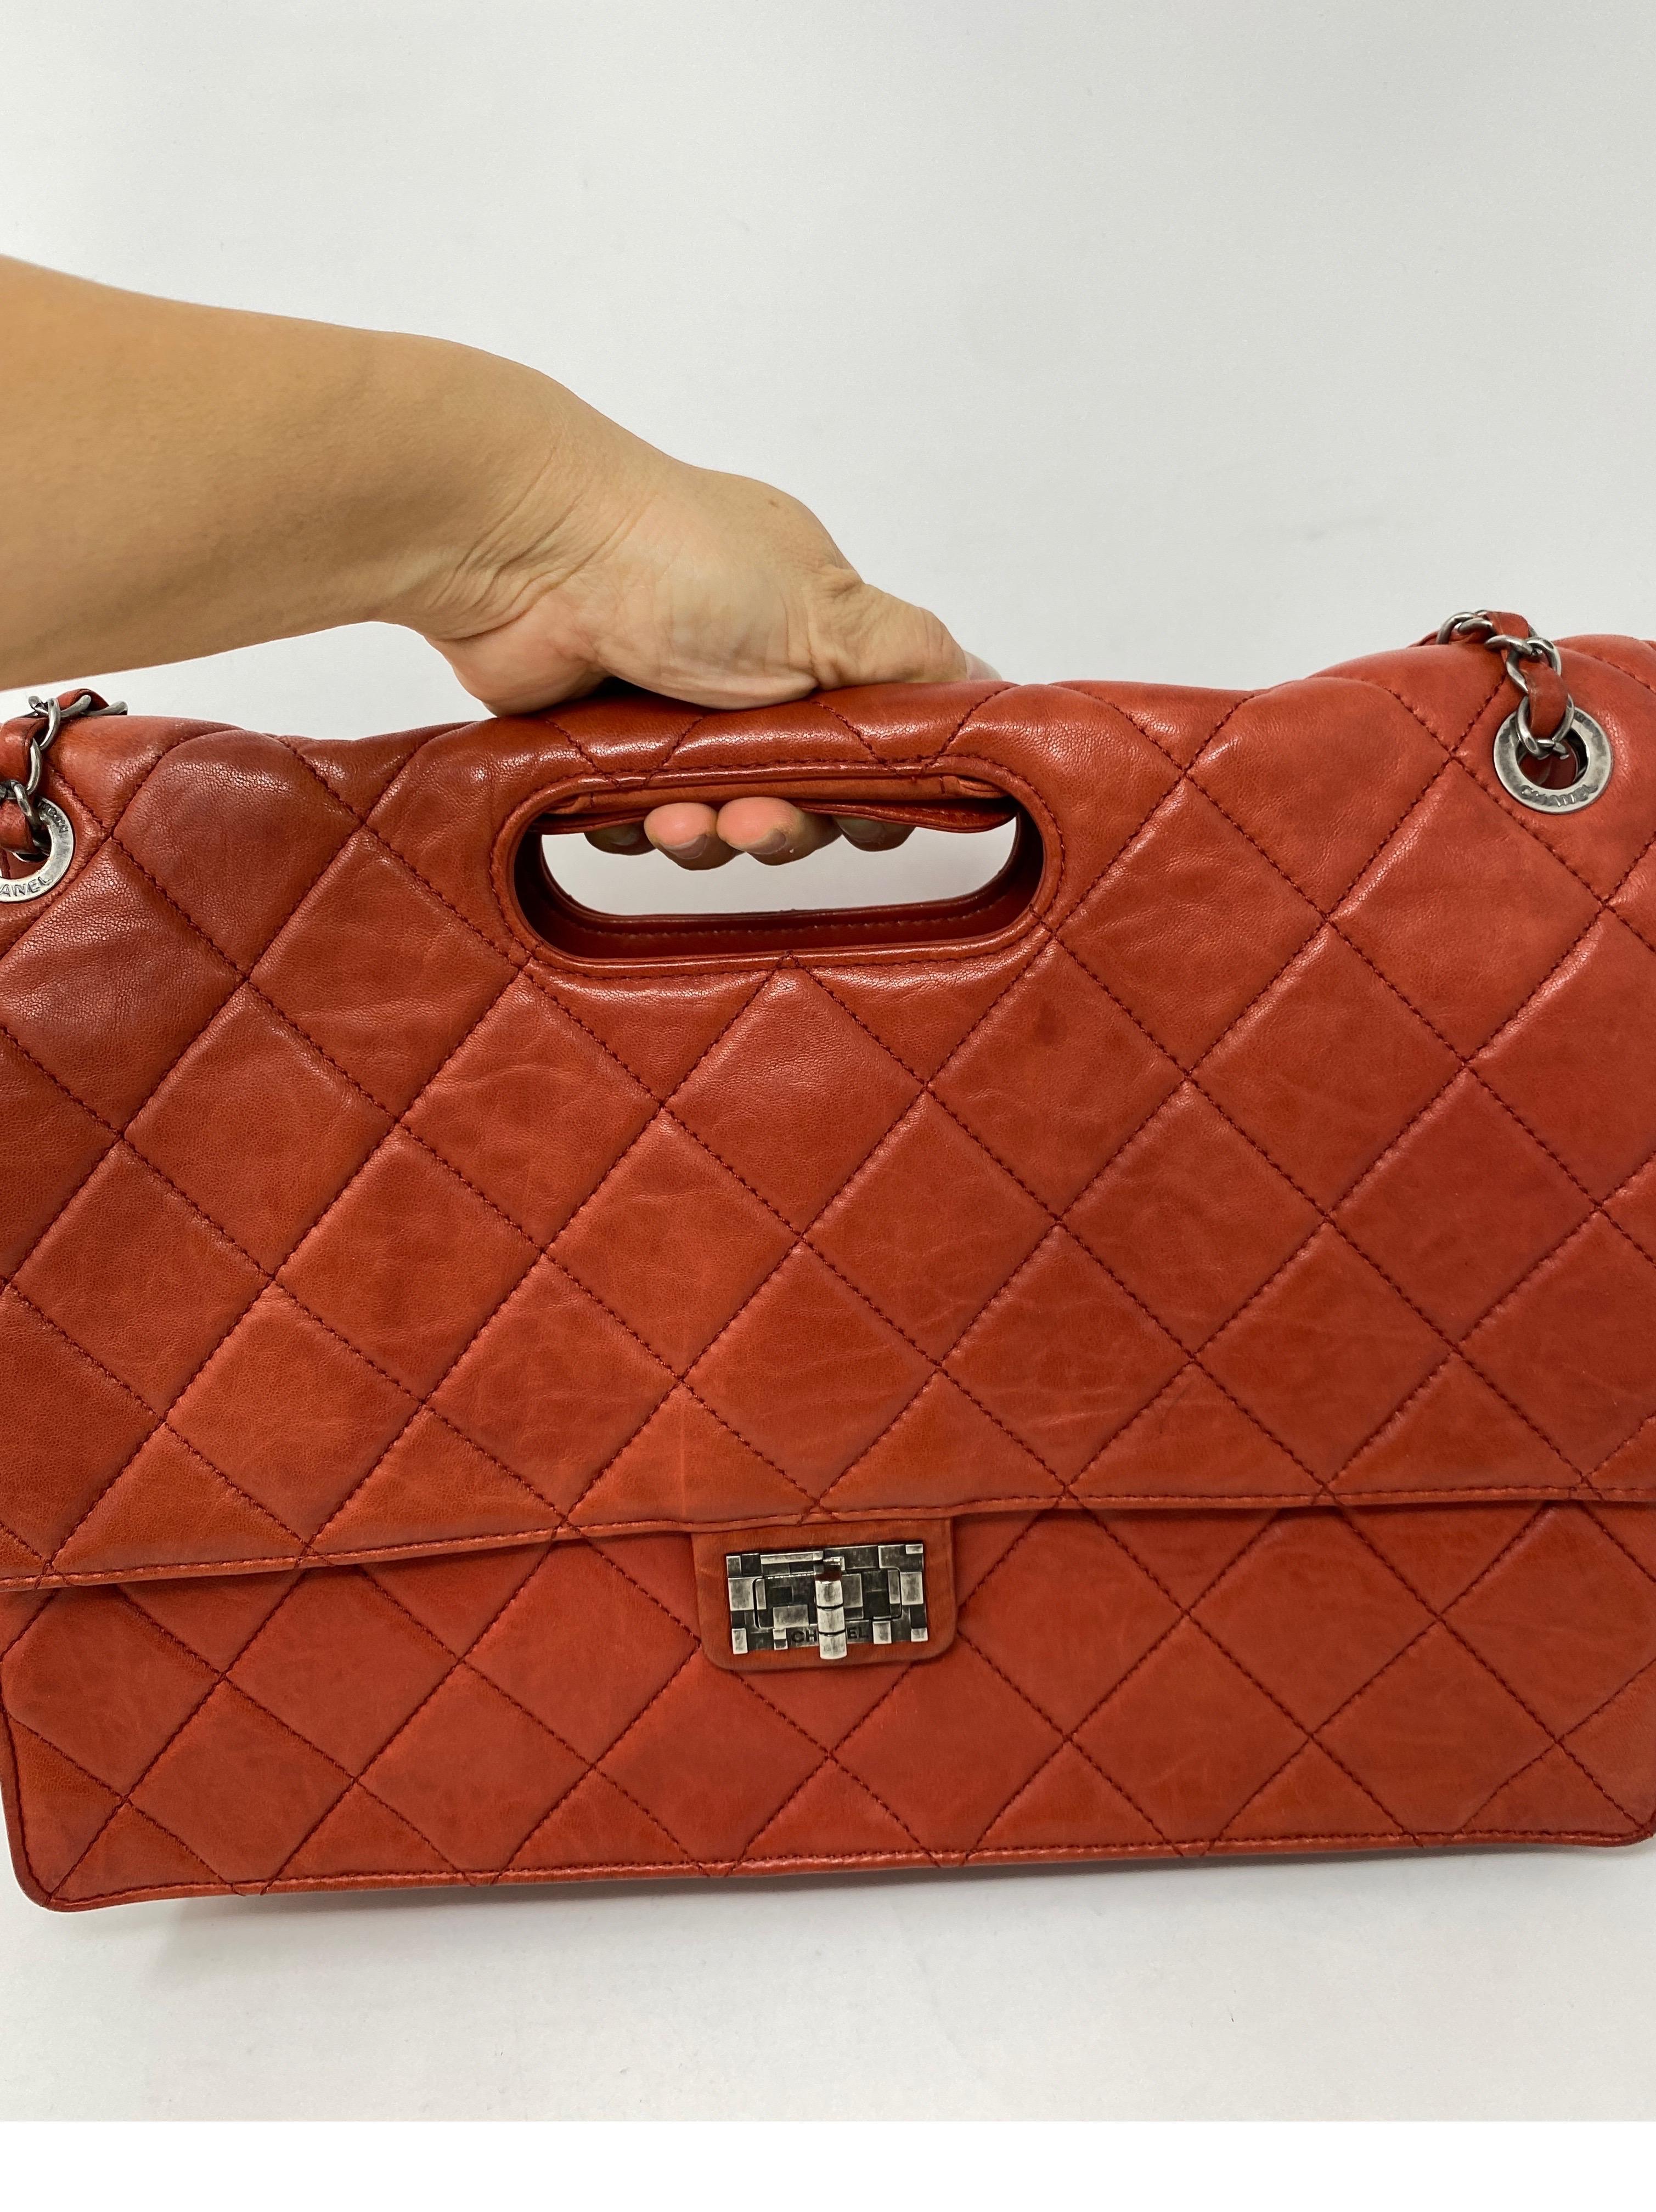 Chanel Red Bag  13